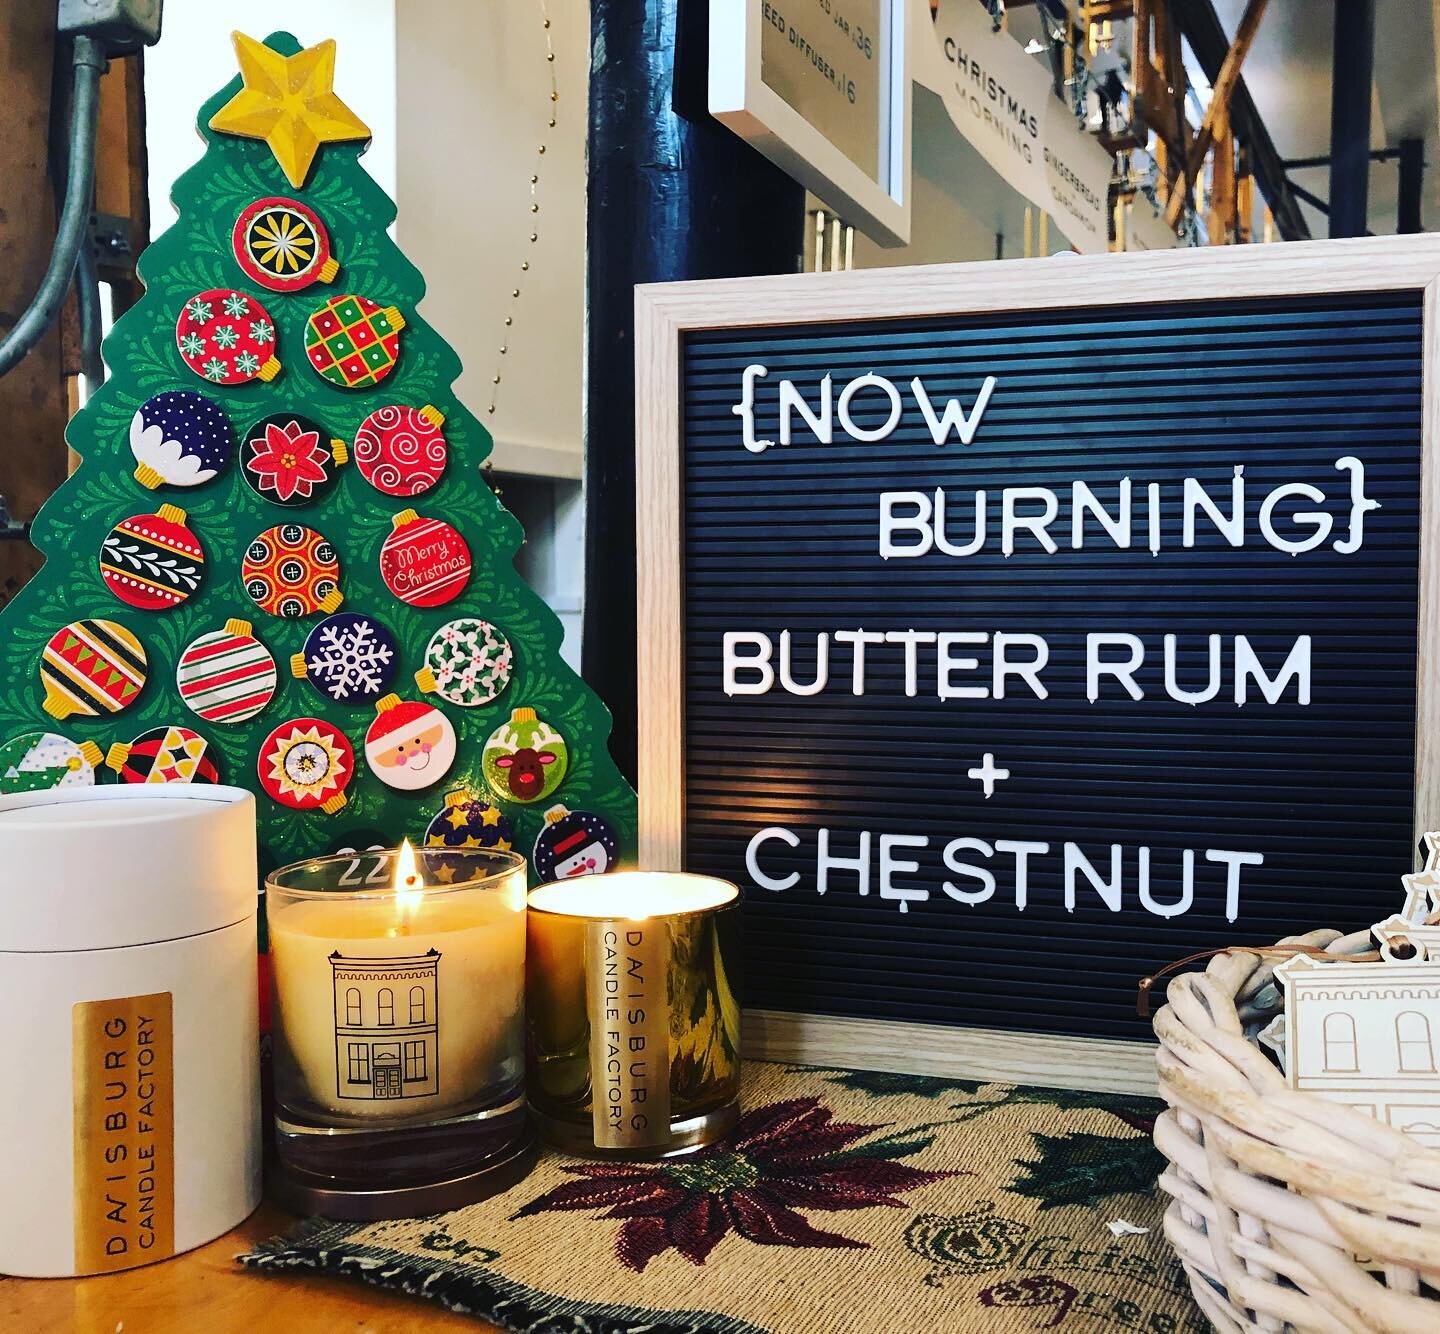 Yummm Butter rum Chestnut!! We are open Friday and Saturday 10am till 8pm. Or online 24/7 link in bio.